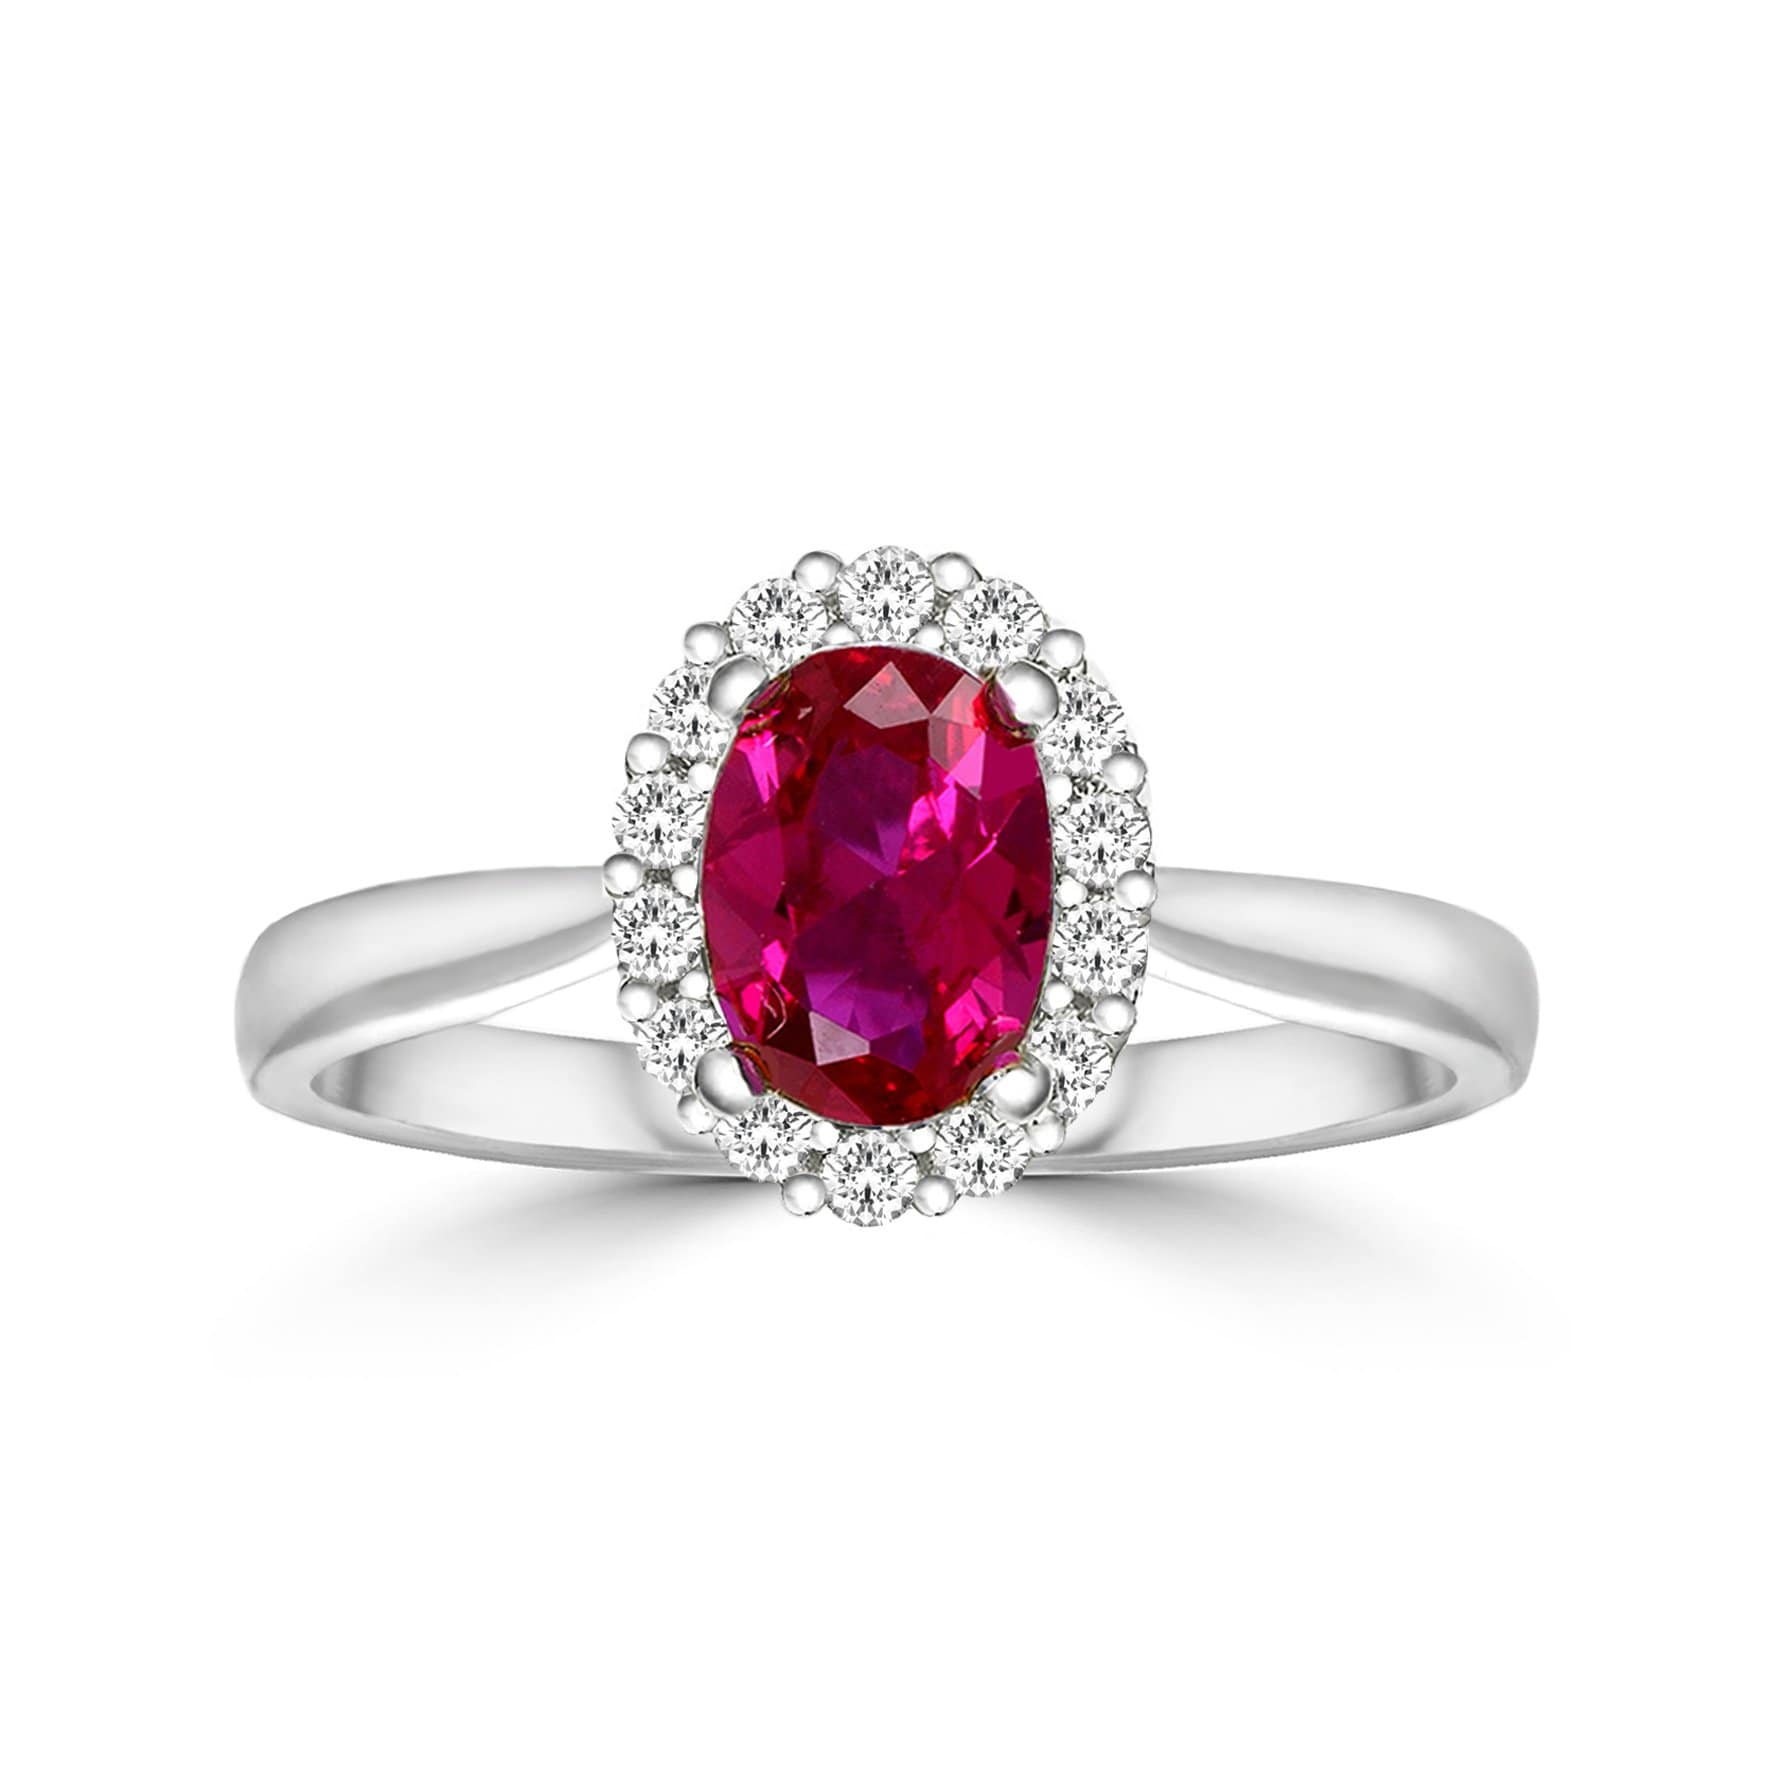 Lynora Jewellery Ring Opulence Halo Ring Sterling Silver & Ruby Stone